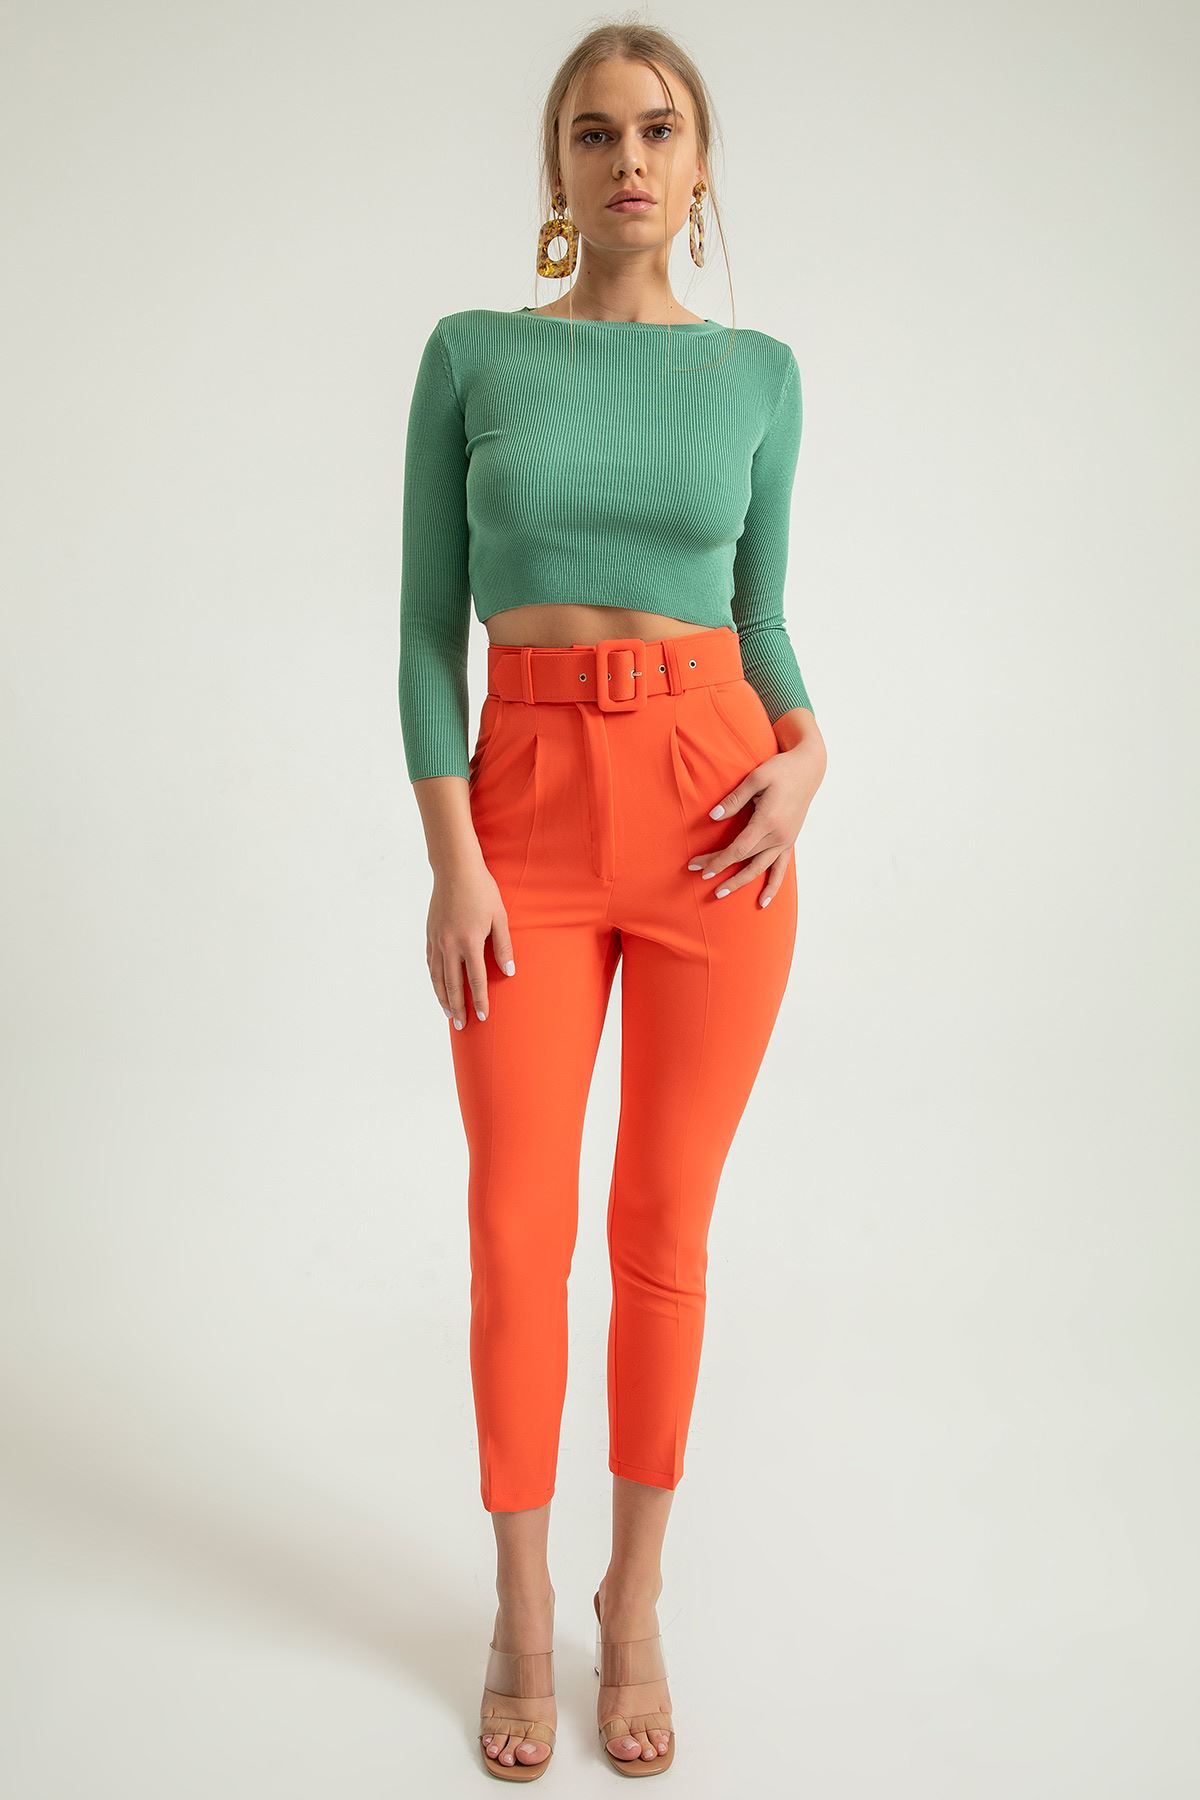 Atlas Fabric Ankle Length Tight Fit Women'S Trouser With Belt - Coral